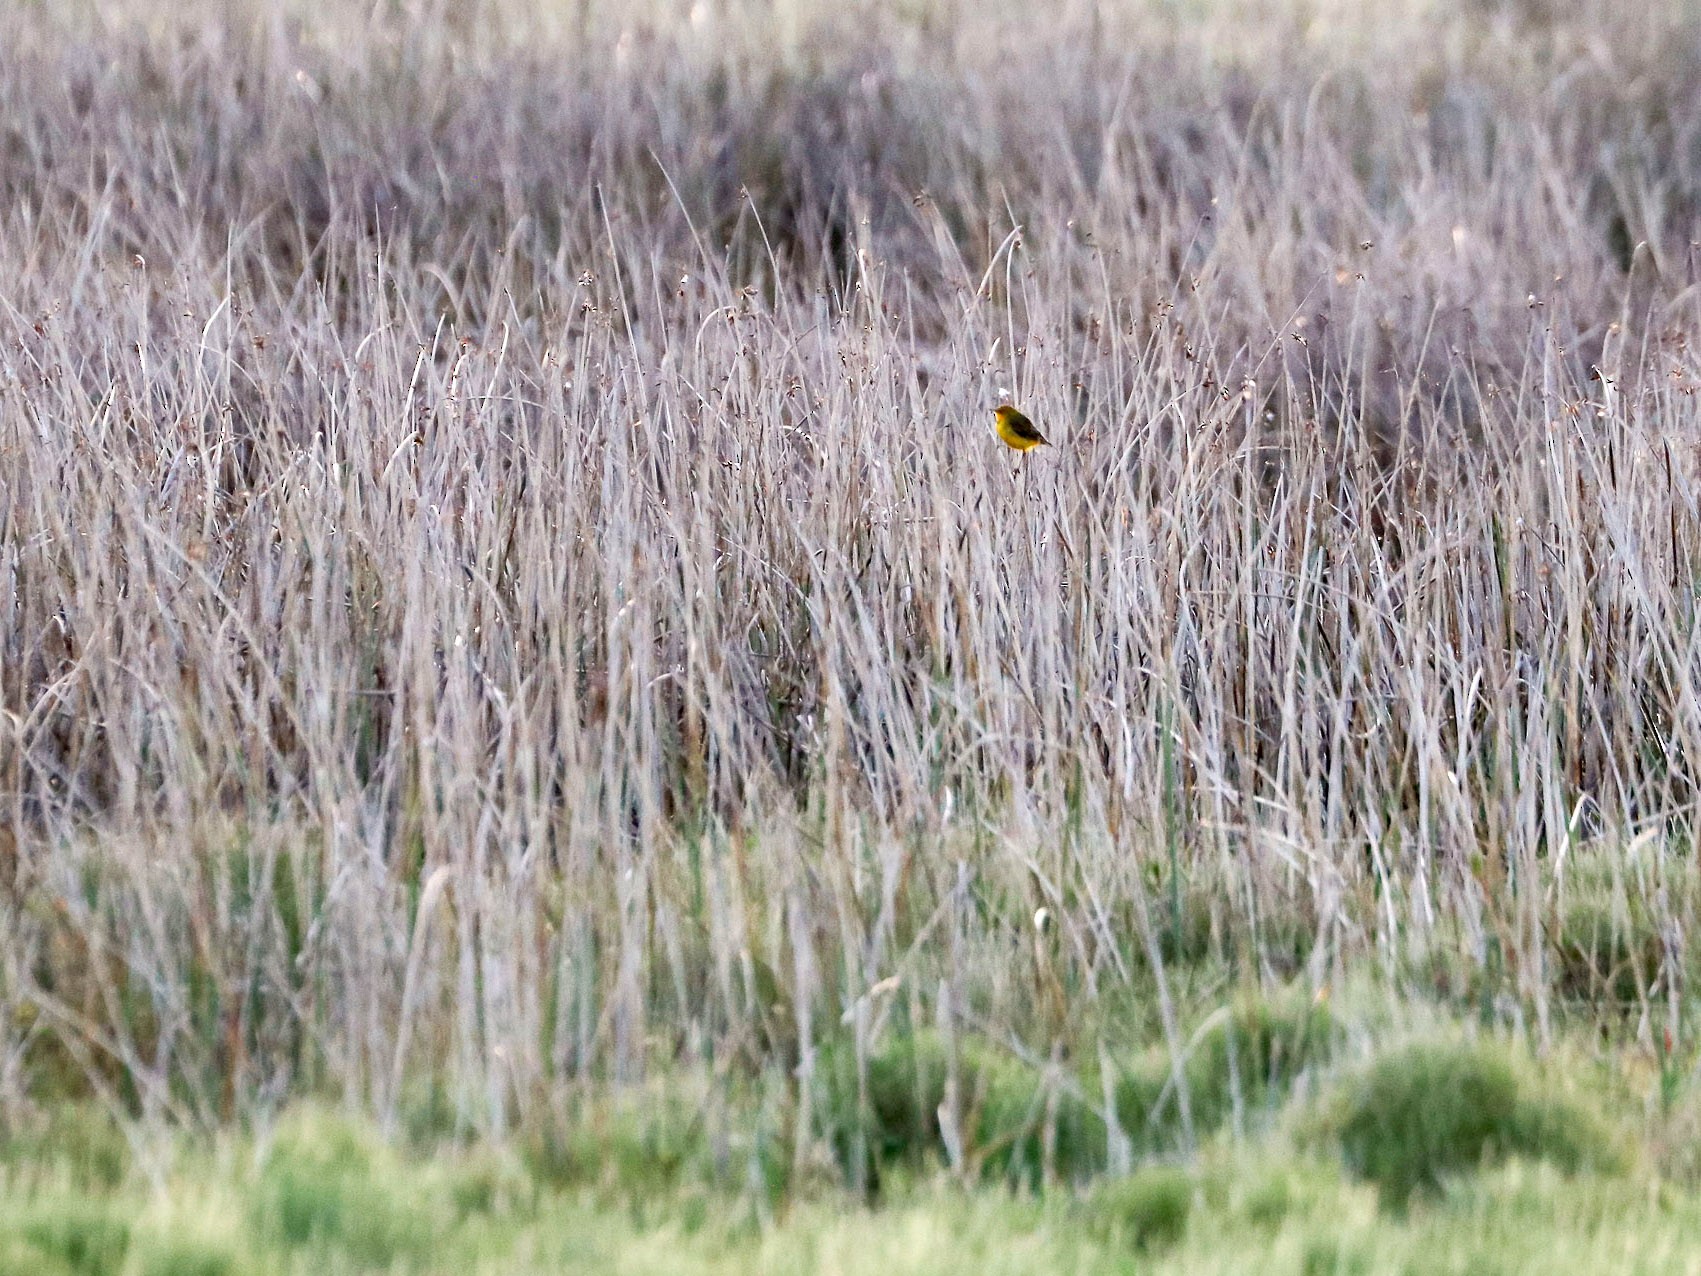 Yellow Chat - Ged Tranter